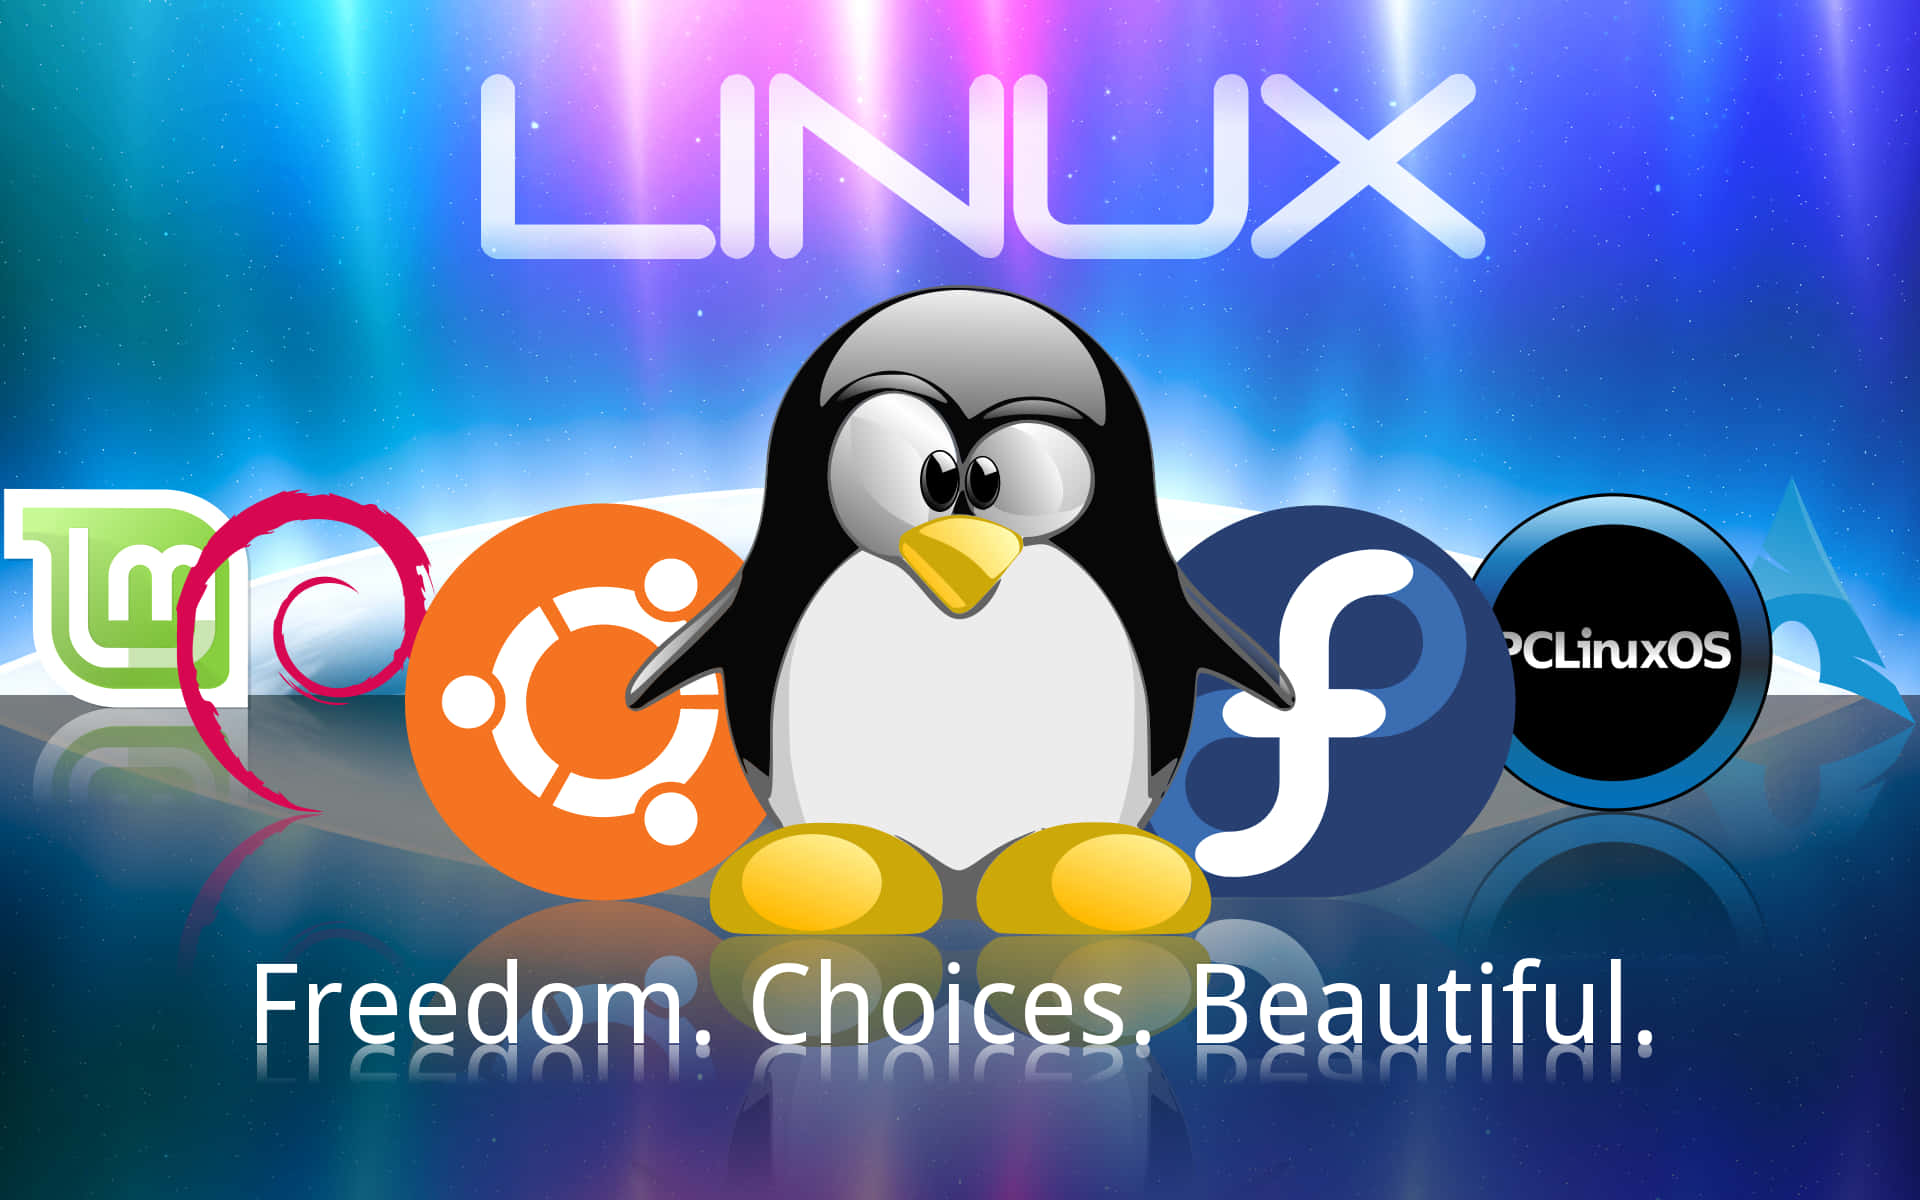 Linux - Freedom, Choices, Beautiful